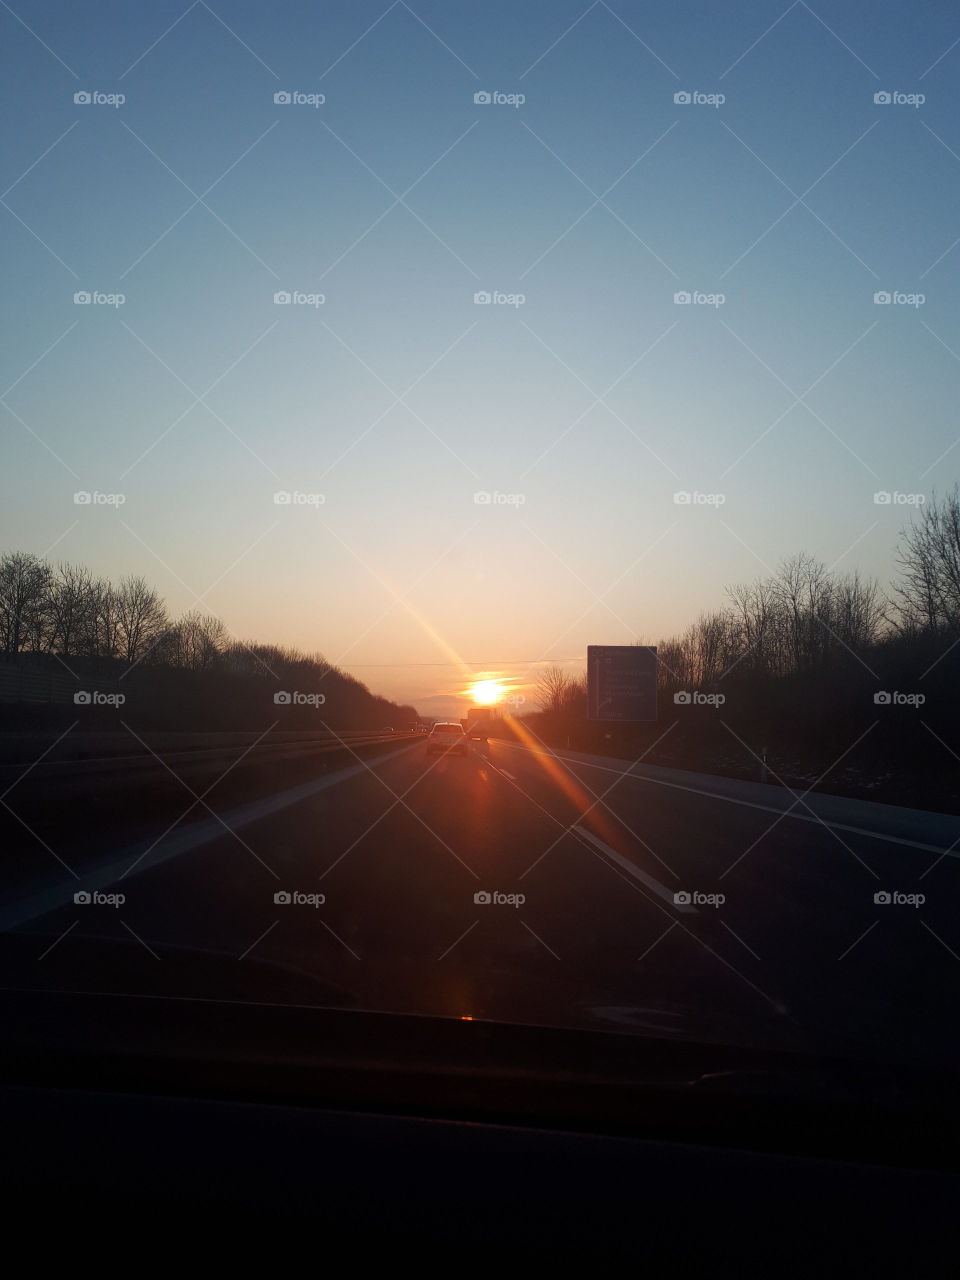 Highway ride by sunrise